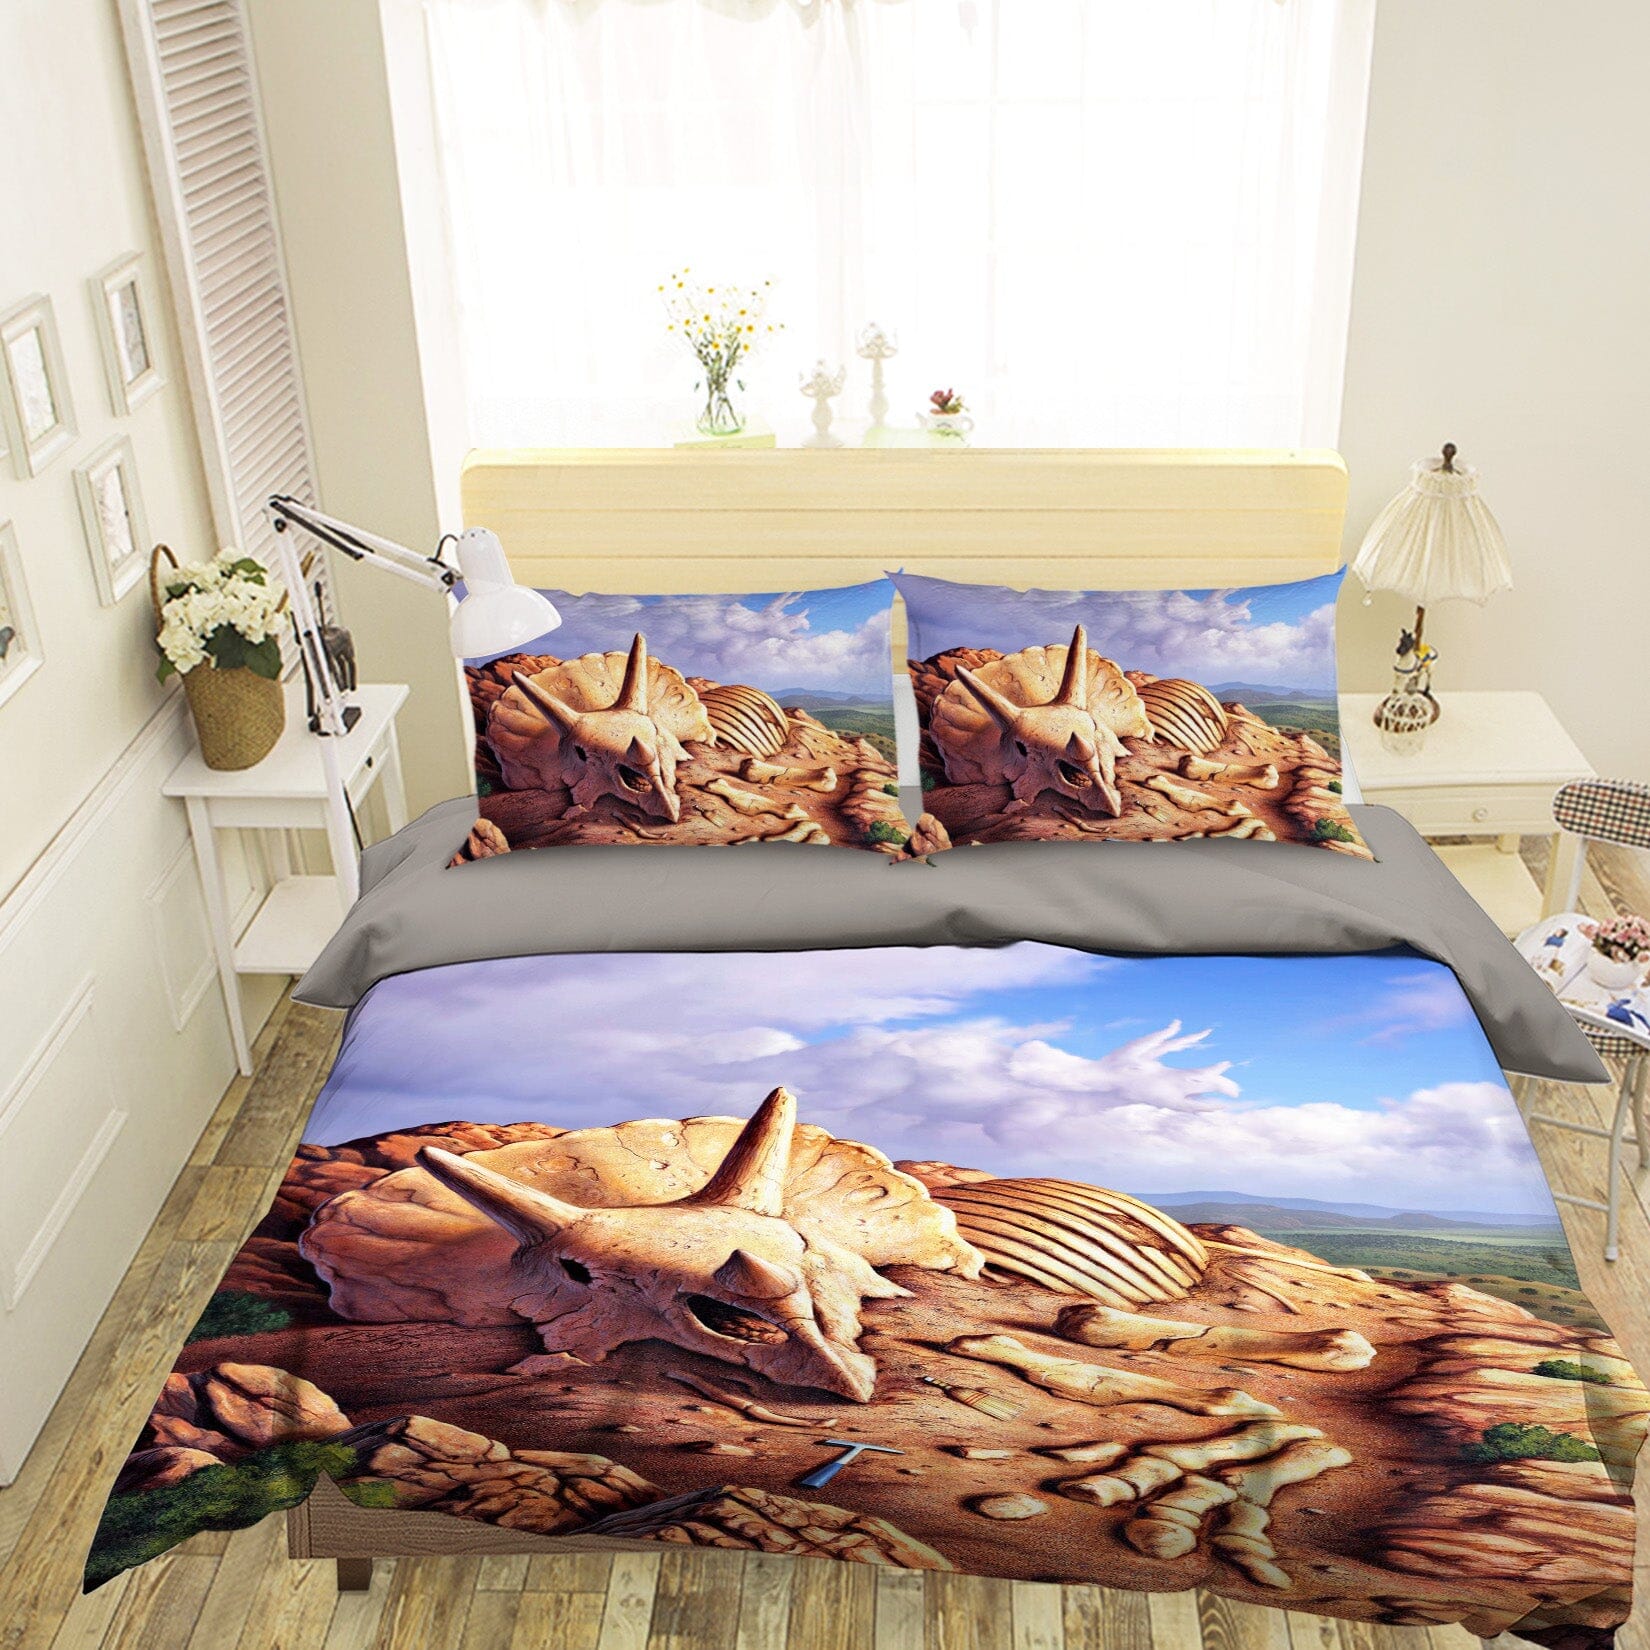 3D Dino Dig 2117 Jerry LoFaro bedding Bed Pillowcases Quilt Quiet Covers AJ Creativity Home 